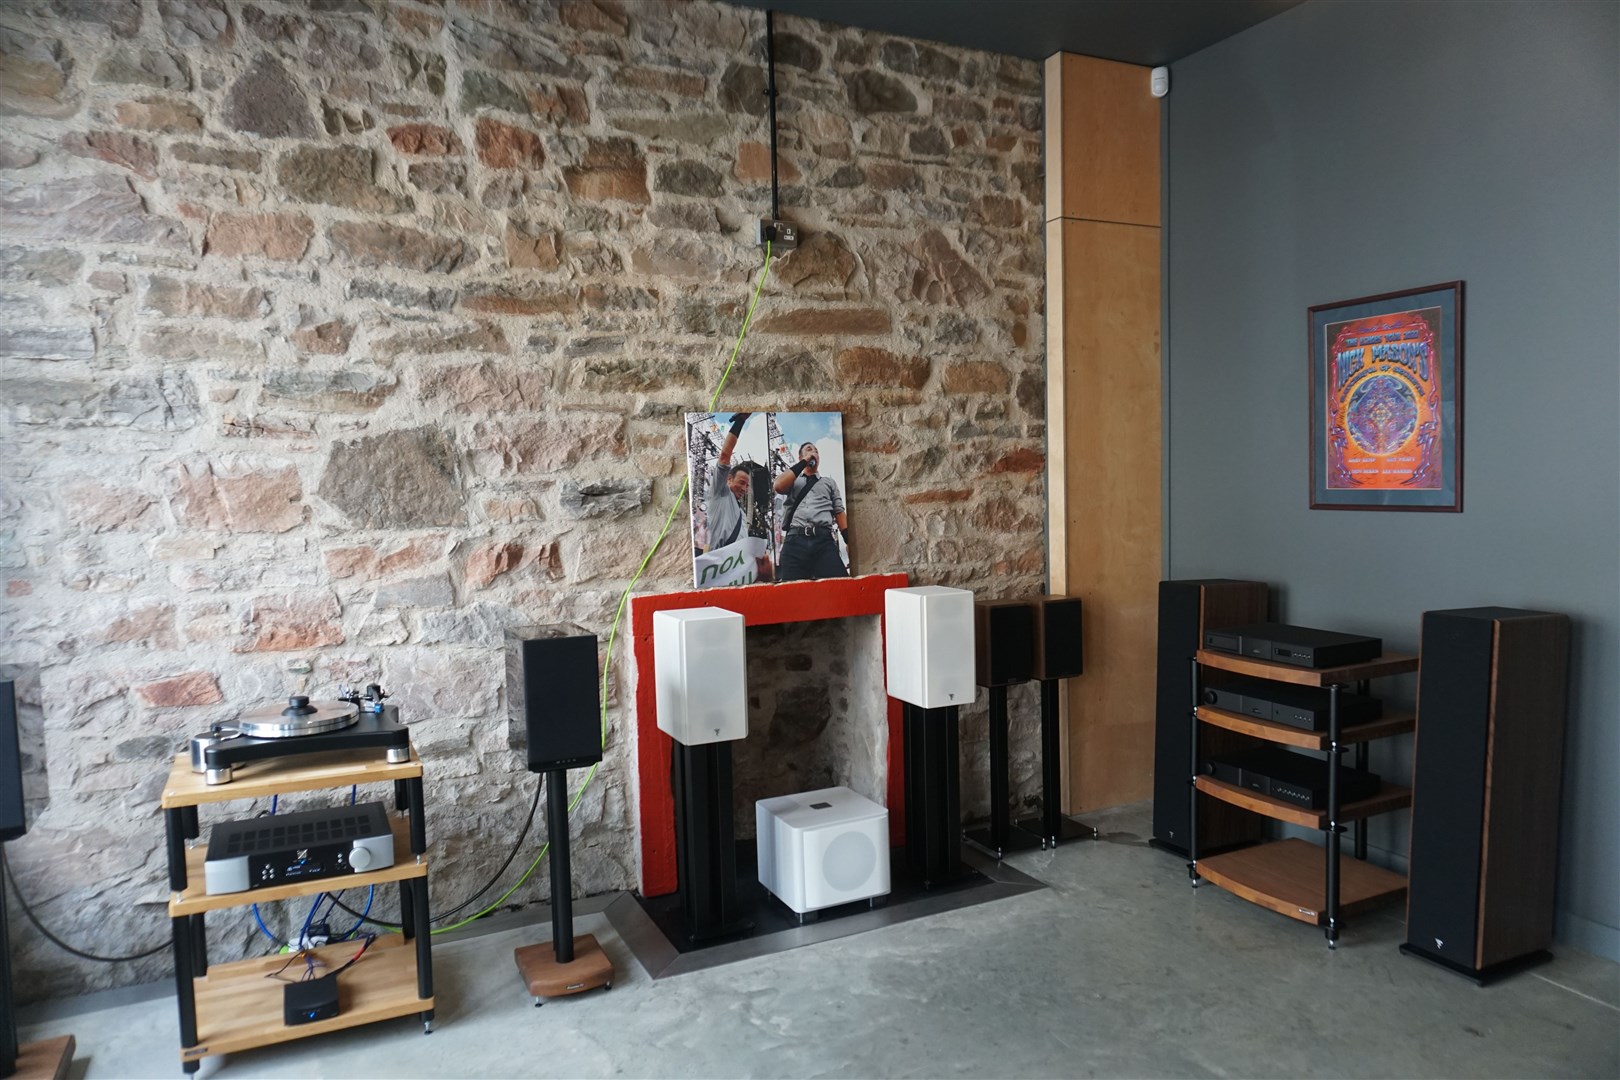 The shop offers a selection of hi-fi equipment and discs. Pictures: Federica Stefani.